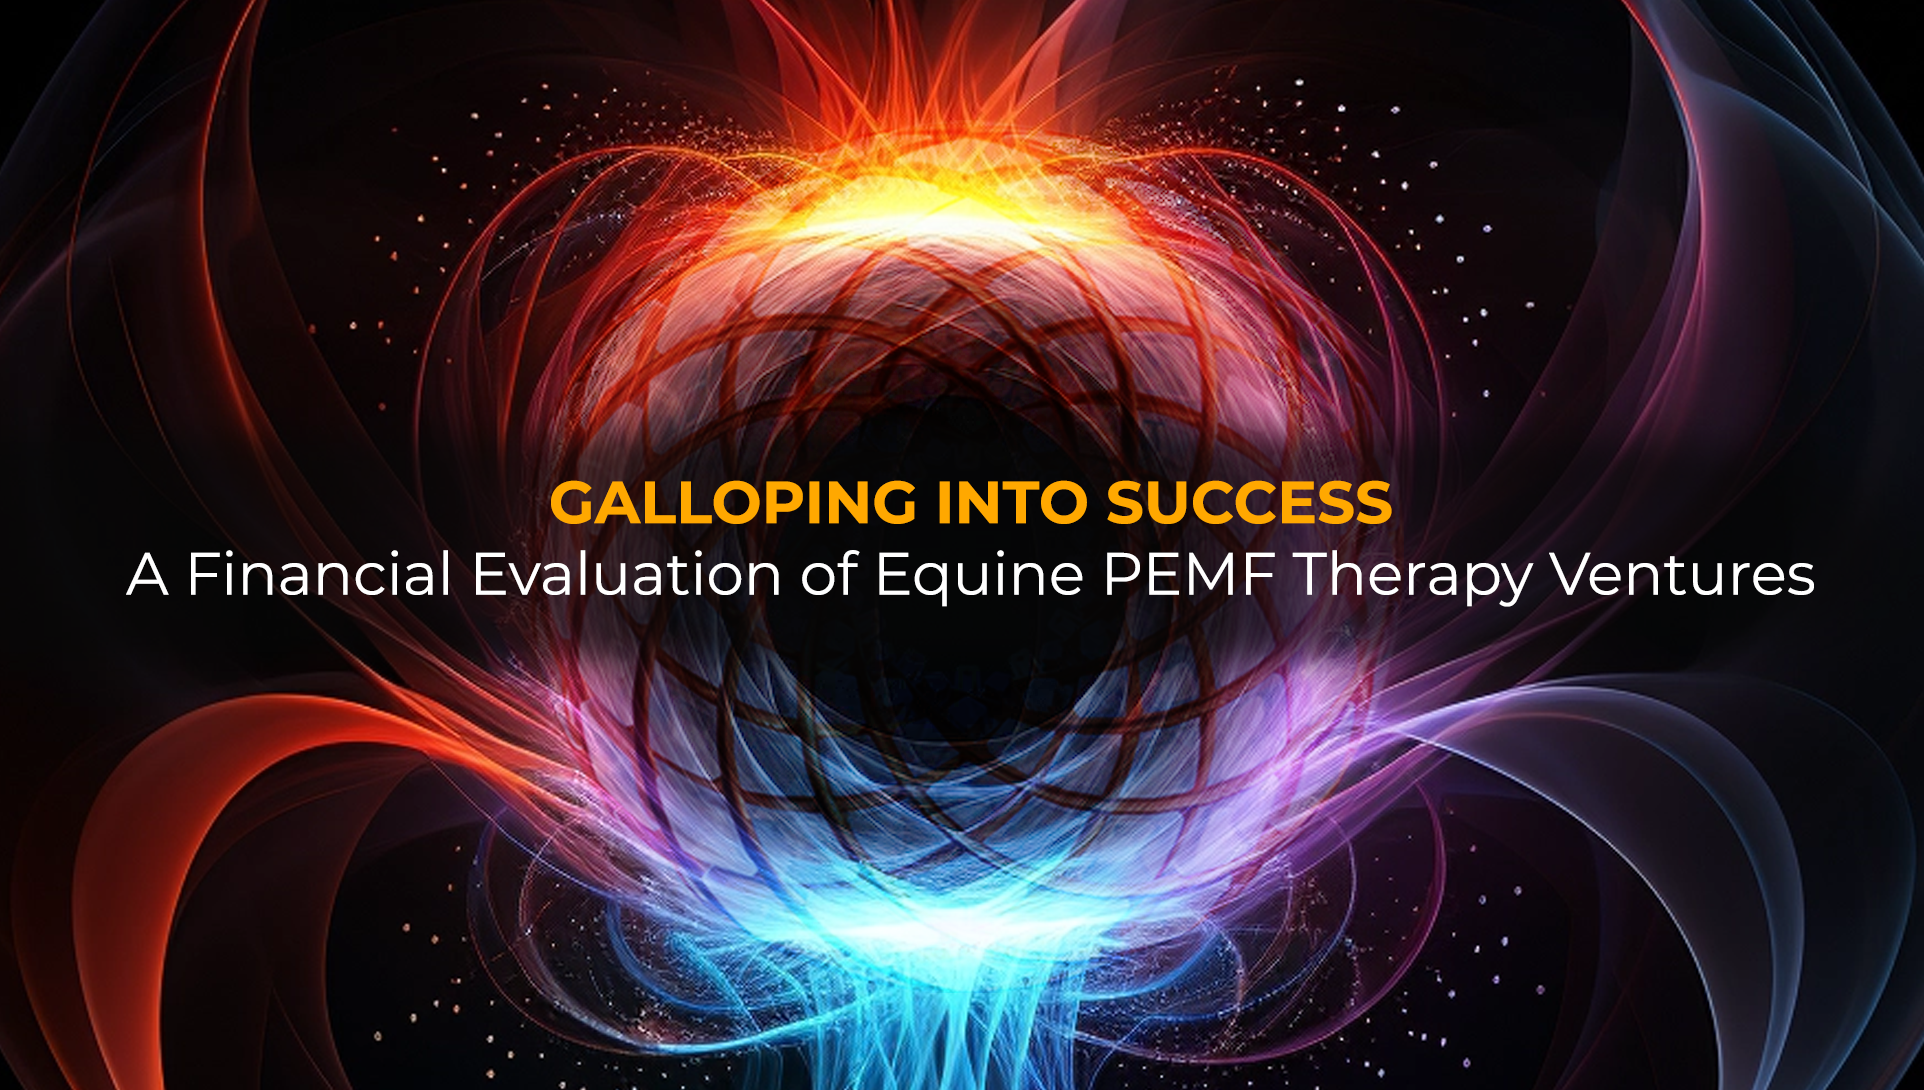 Galloping into Success: A Financial Evaluation of Equine PEMF Therapy Ventures